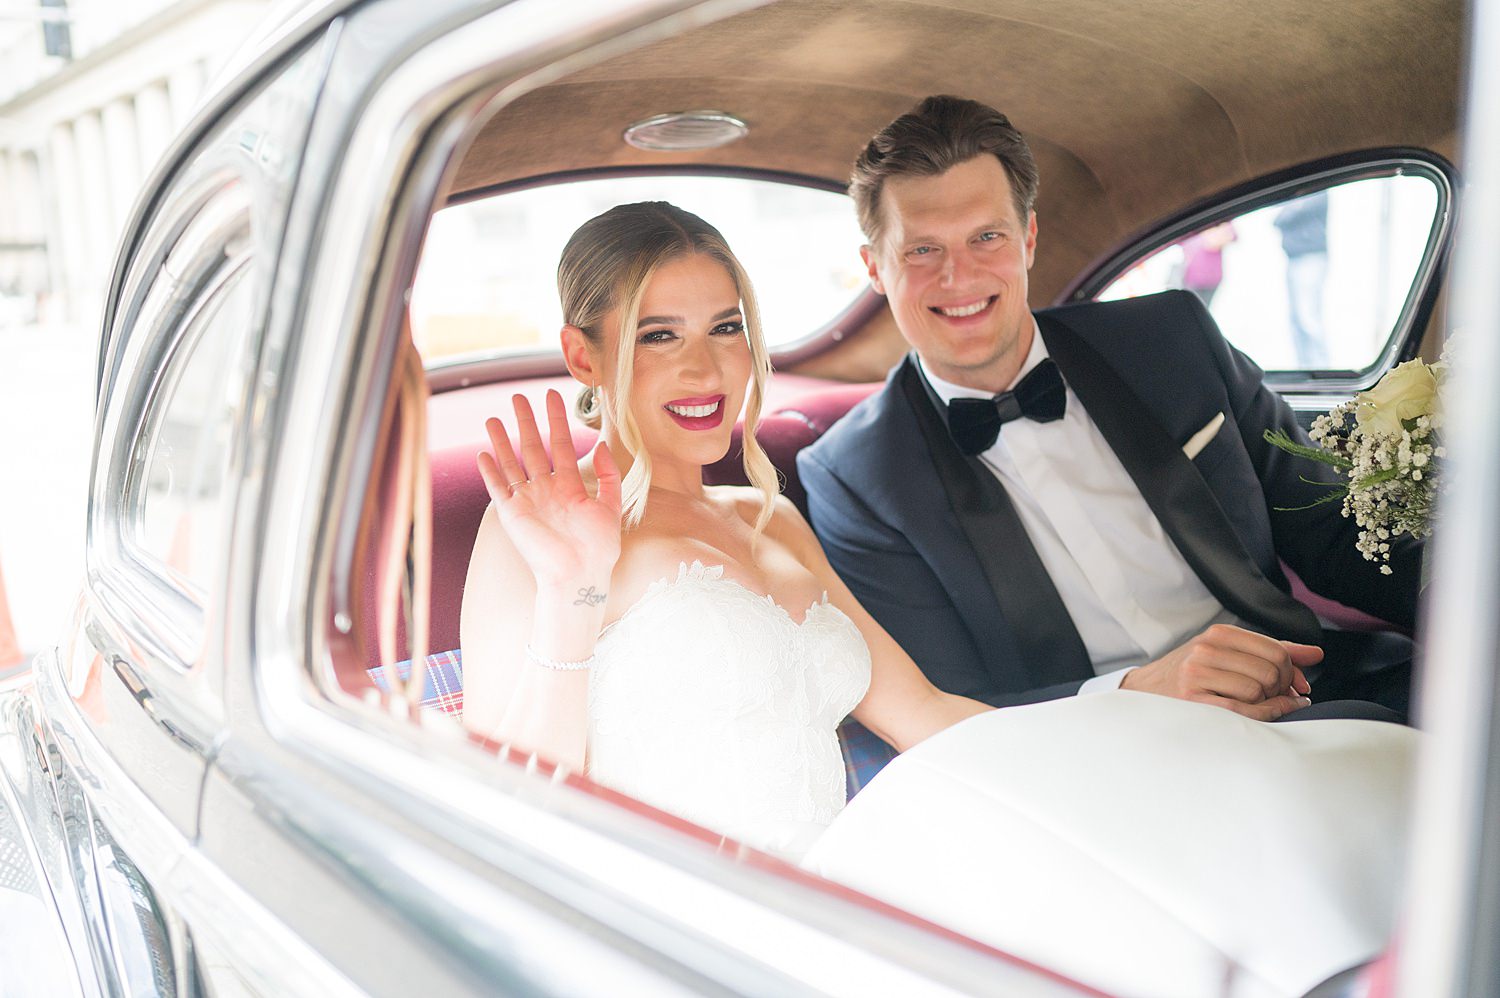 pittsburgh classic car wedding photo • Recommended Vendors